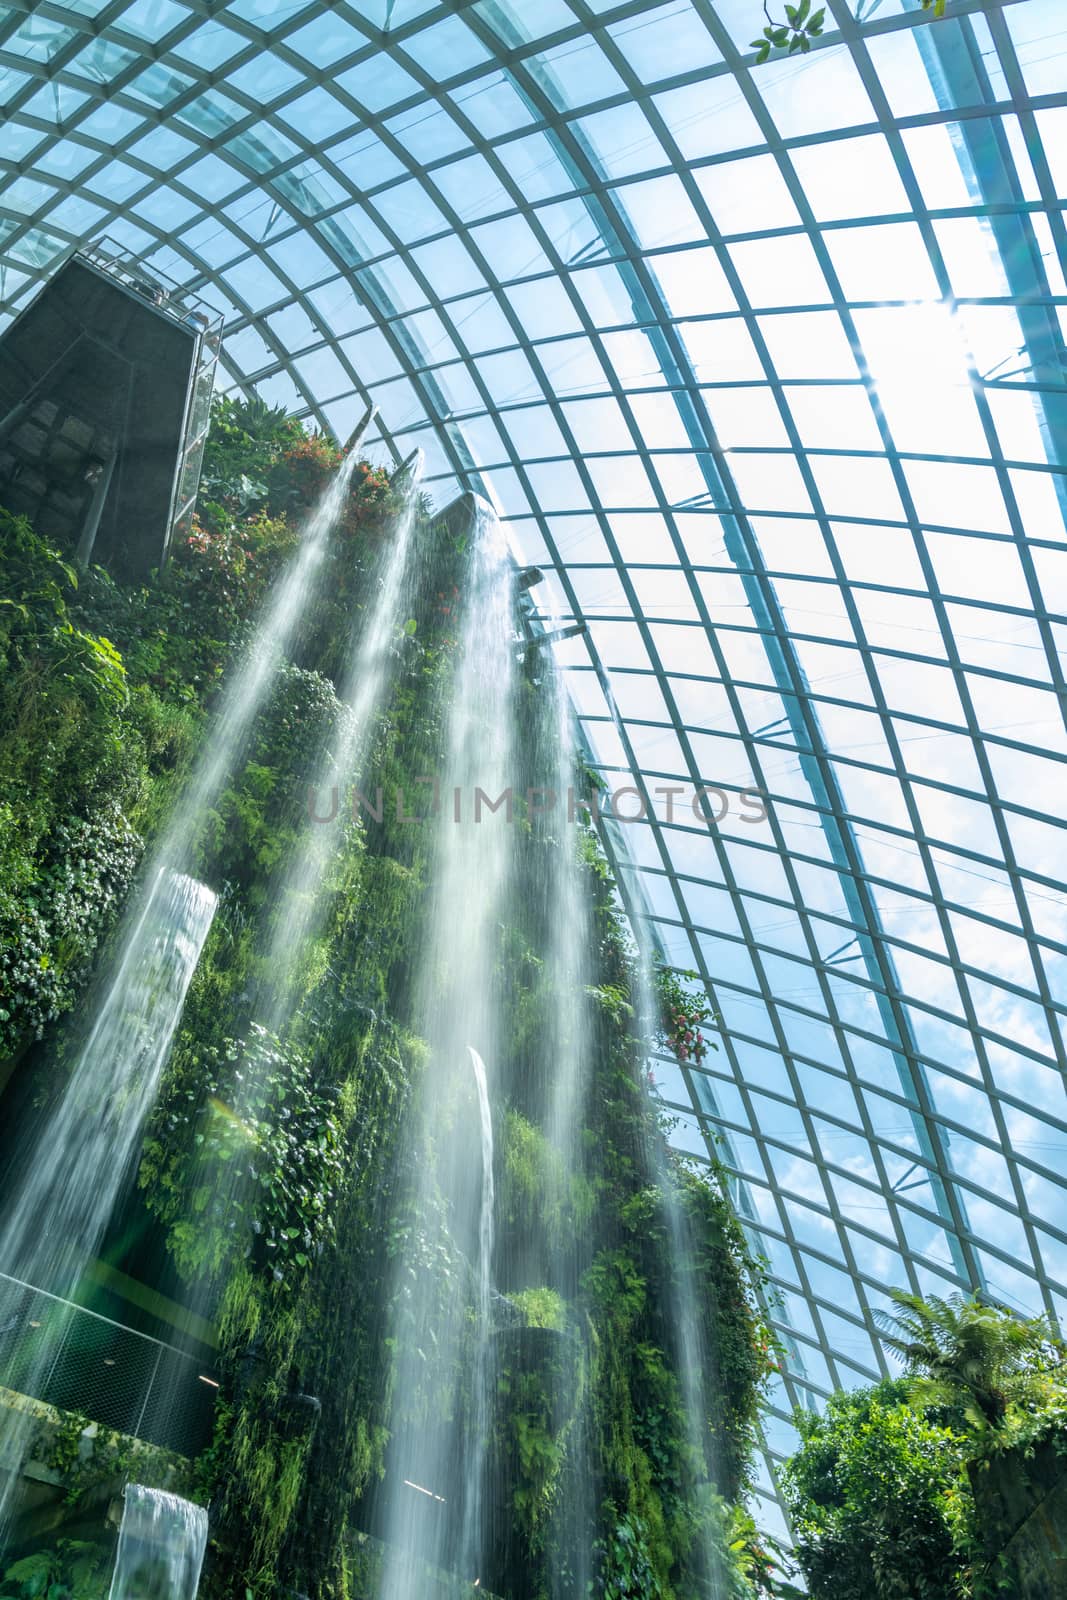 SINGAPORE CITY, SINGAPORE - FEBRUARY 14, 2019: Cloud Forest at the Gardens by the bay mist-filled landscape of rare vegetation and dramatic vistas.